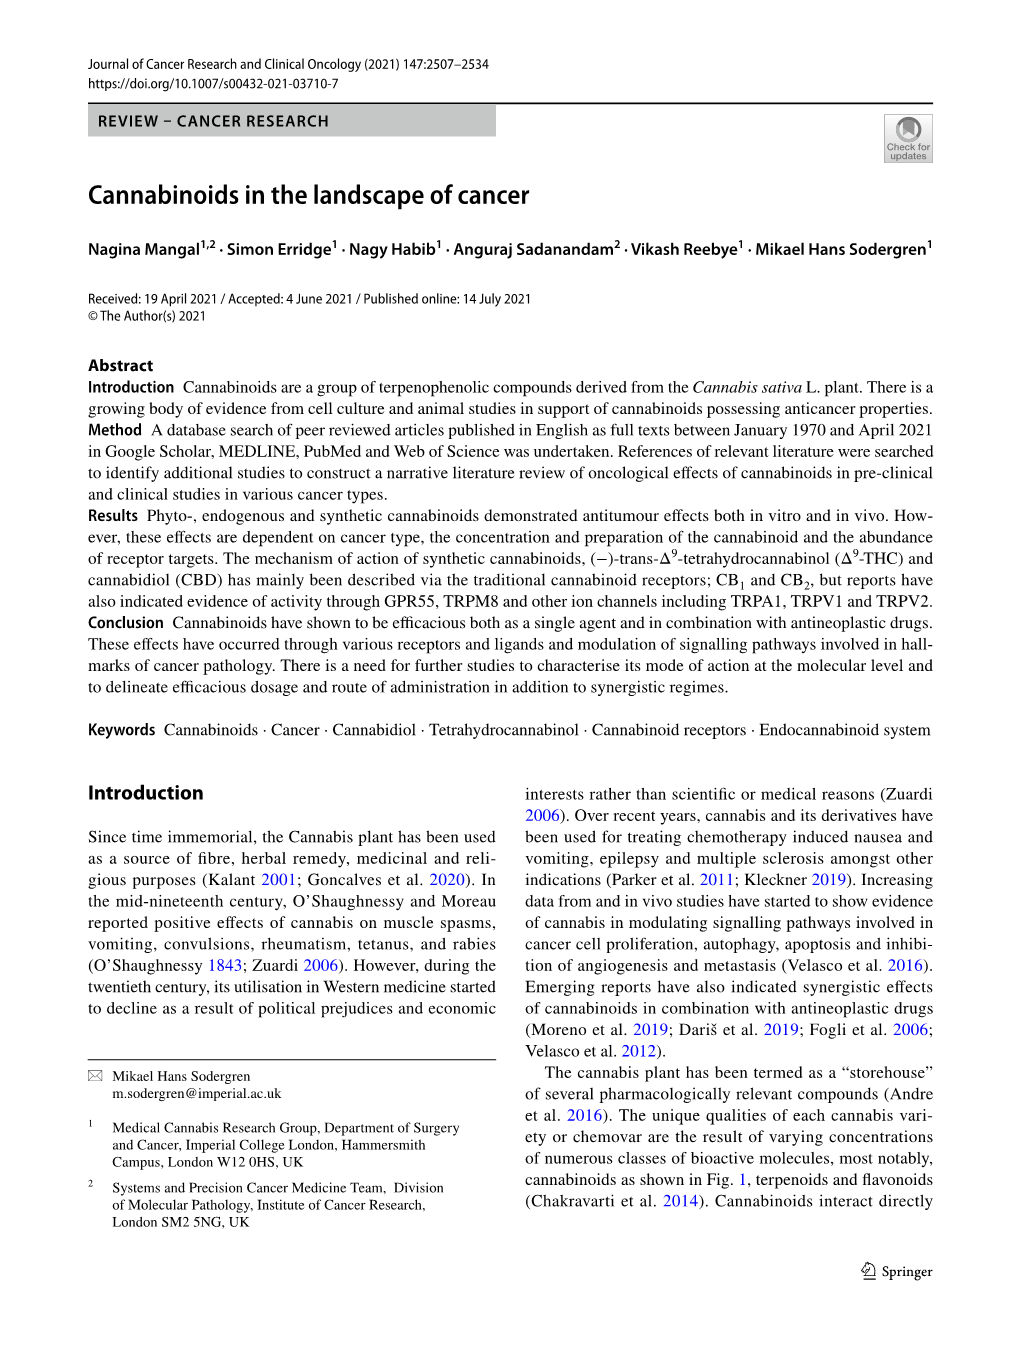 Cannabinoids in the Landscape of Cancer